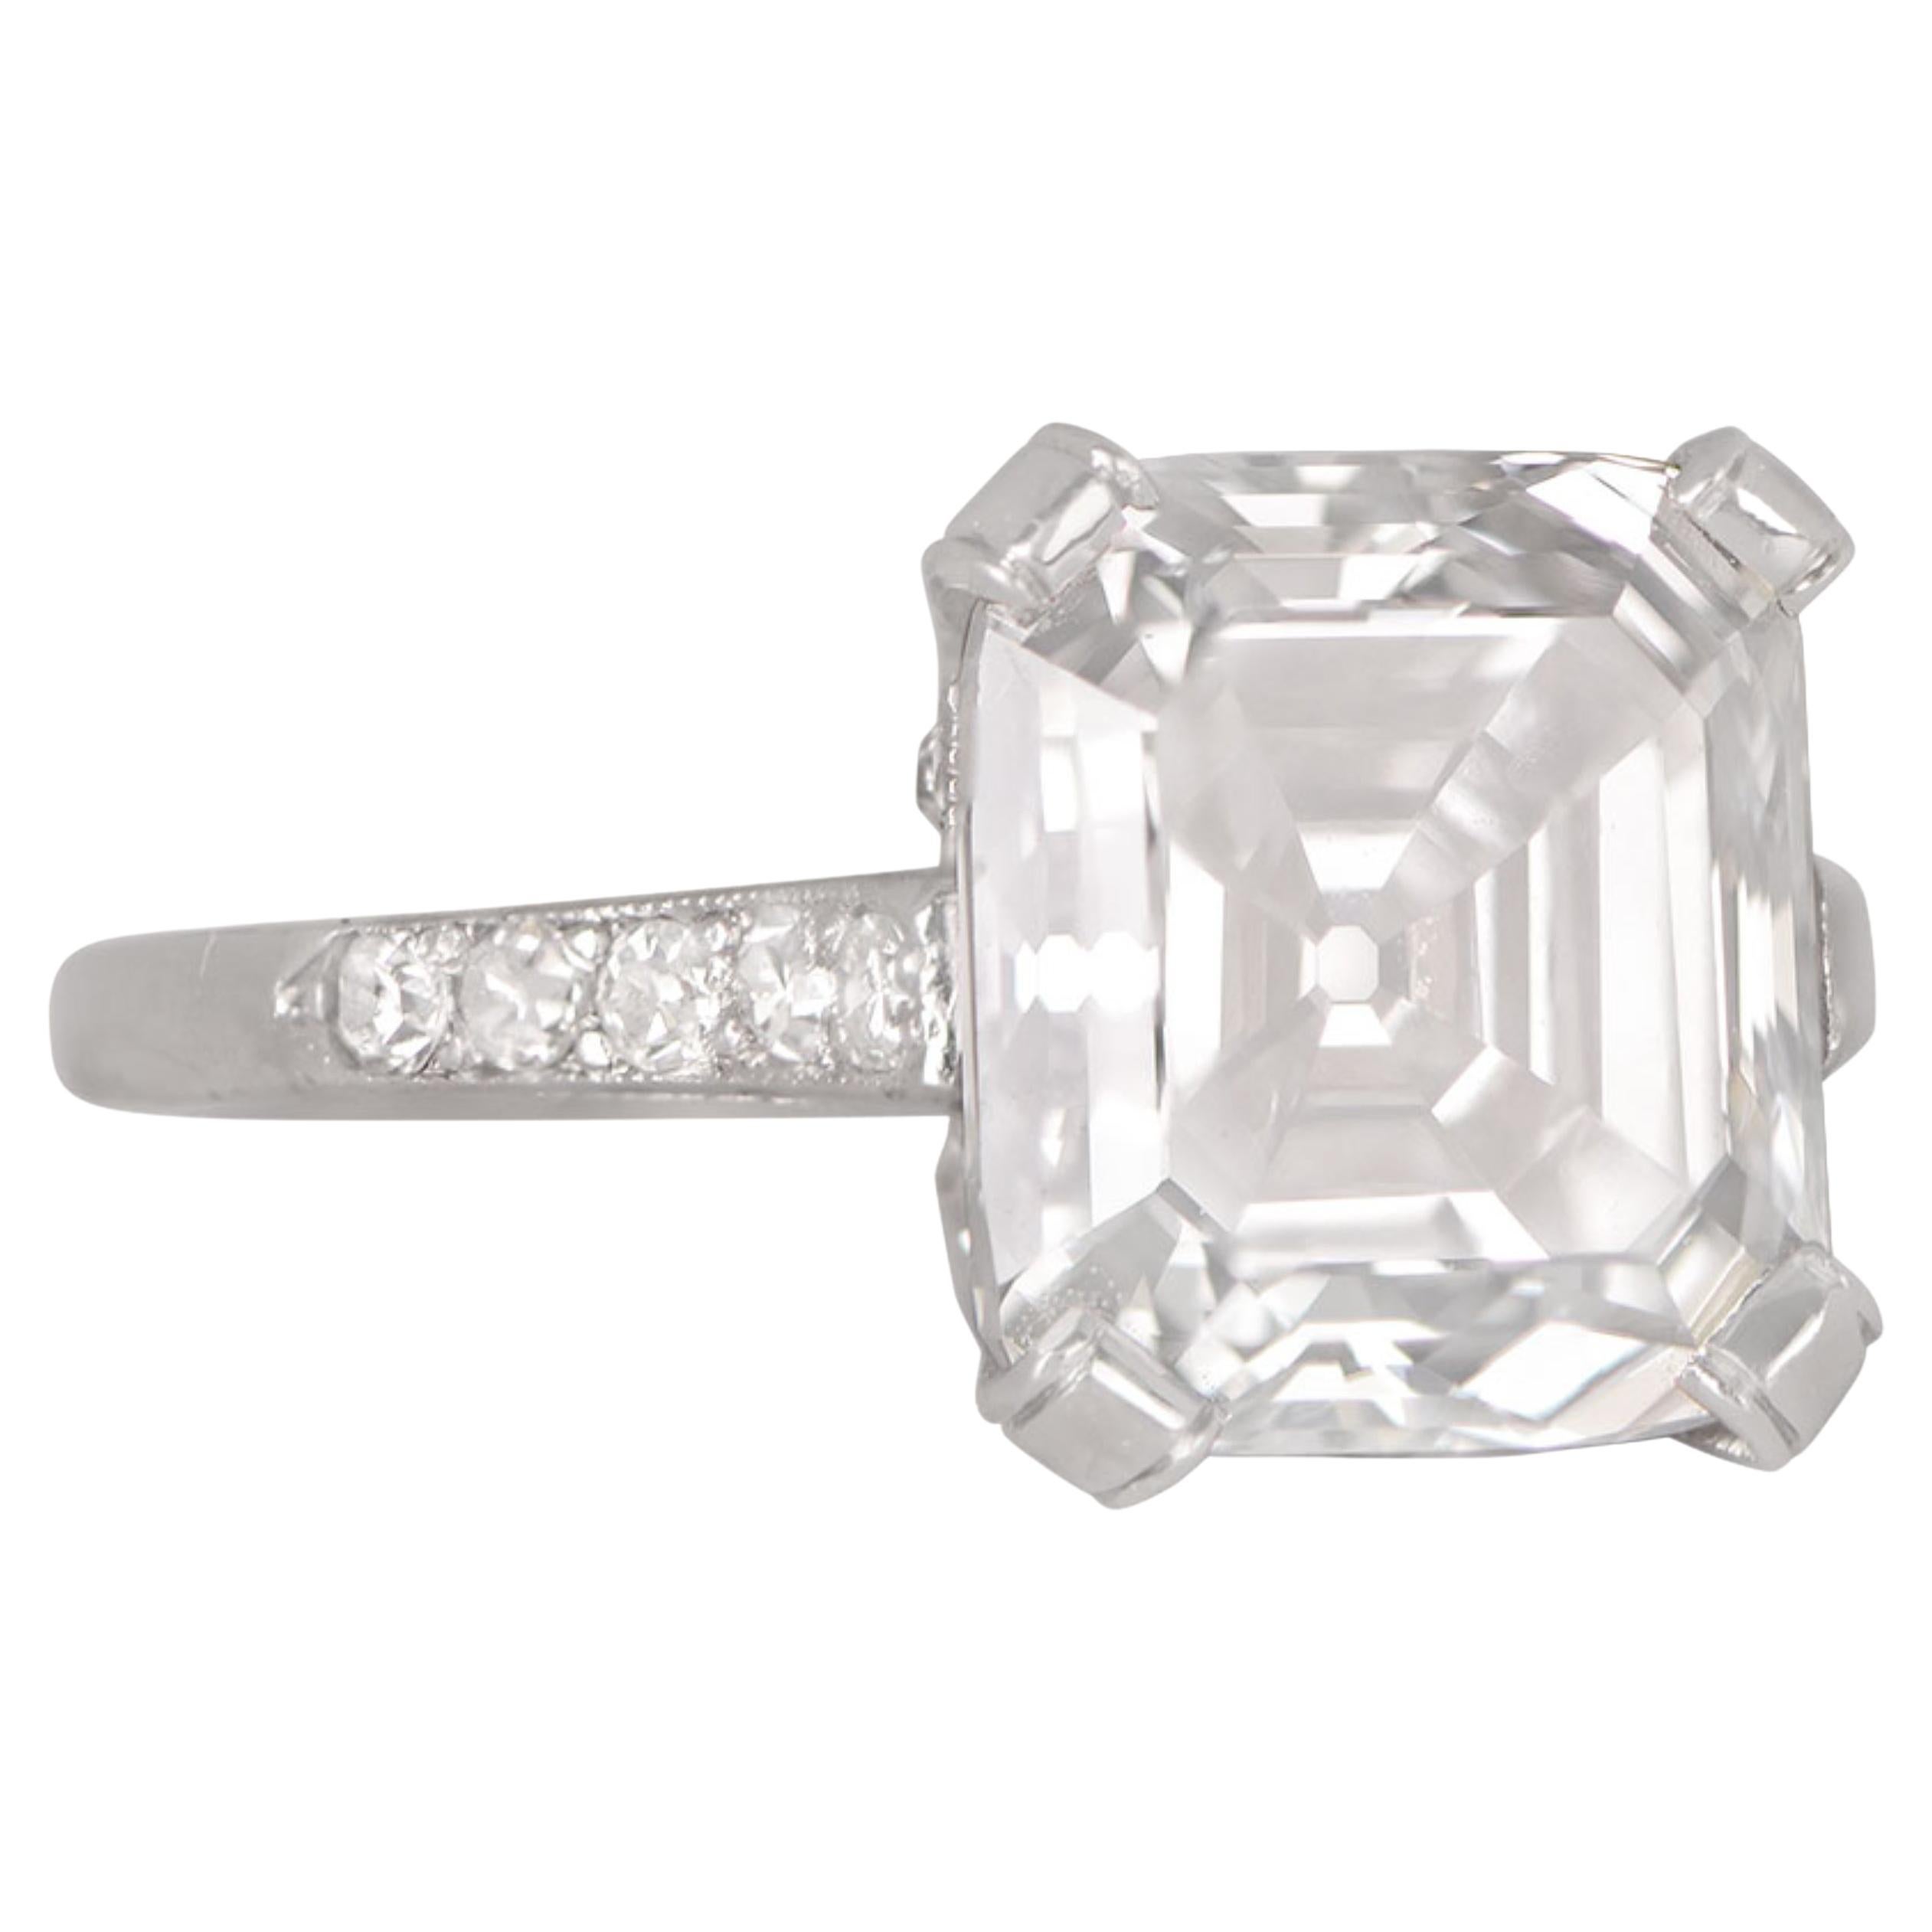 GIA Certified Rare 4.01 CT Square Emerald Cut Natural Diamond Ring in Platinum For Sale